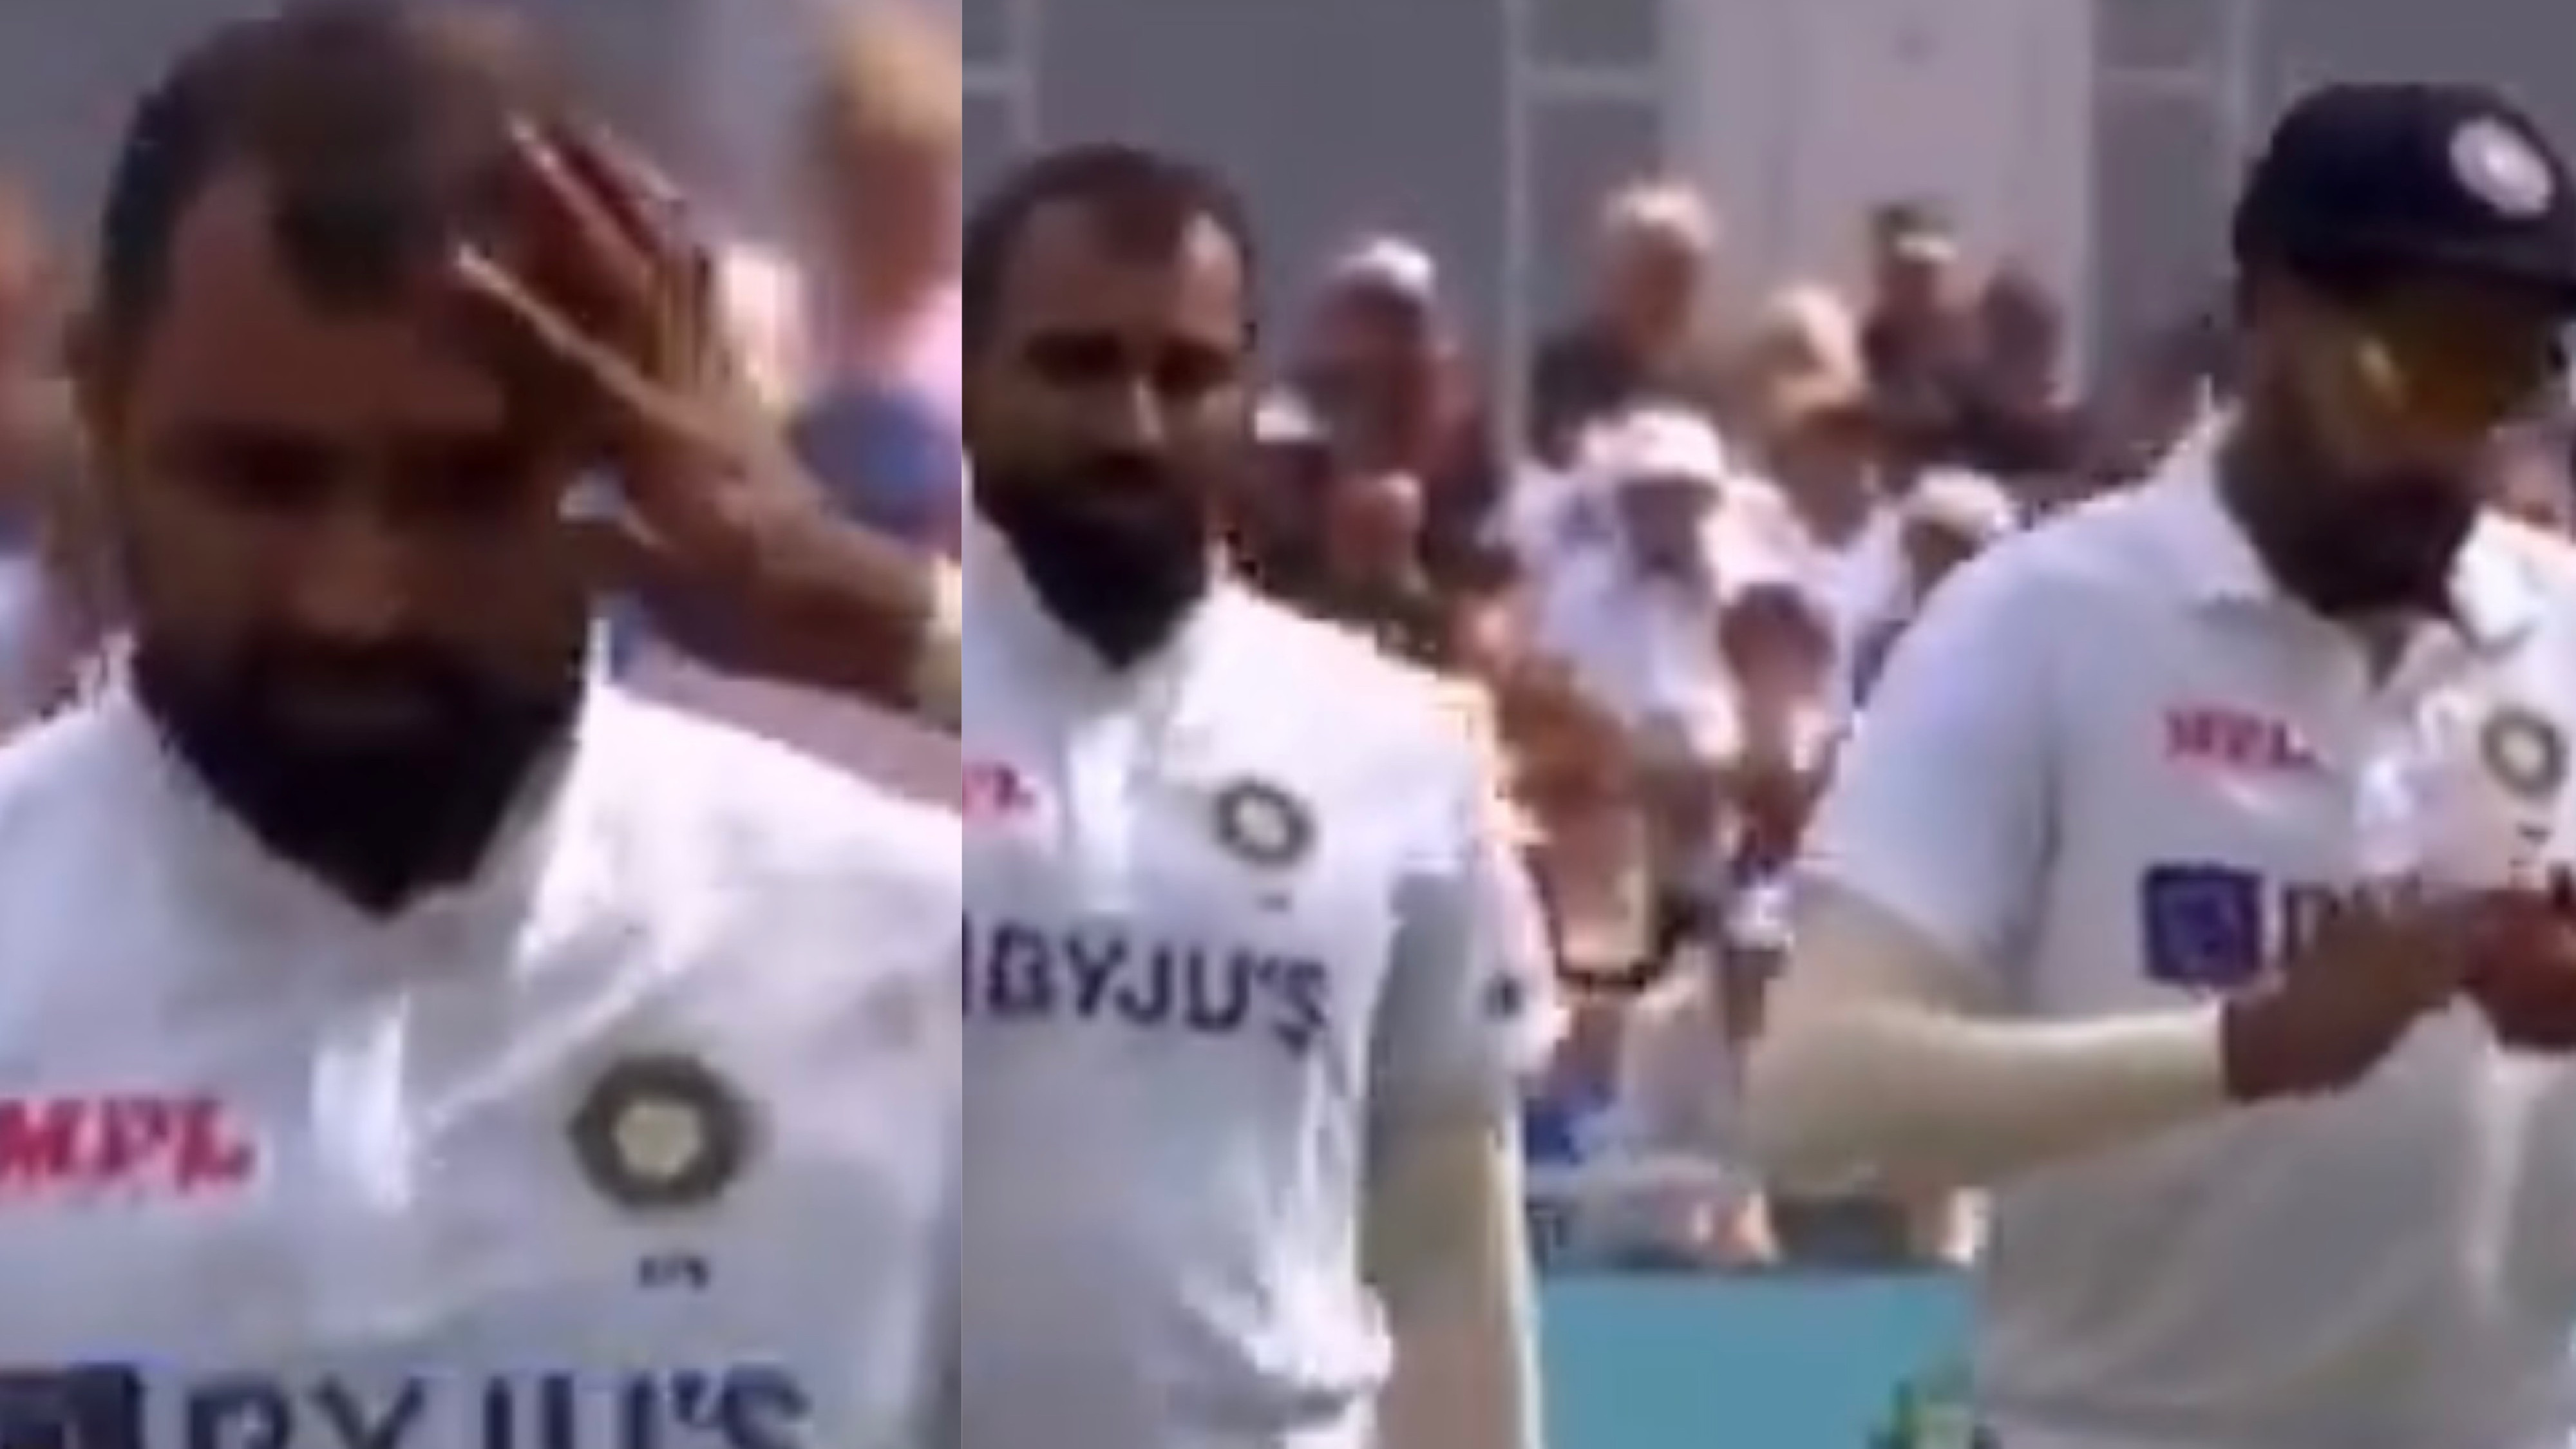 ENG v IND 2021: WATCH - Siraj touches Shami's forehead to shine the ball with his sweat